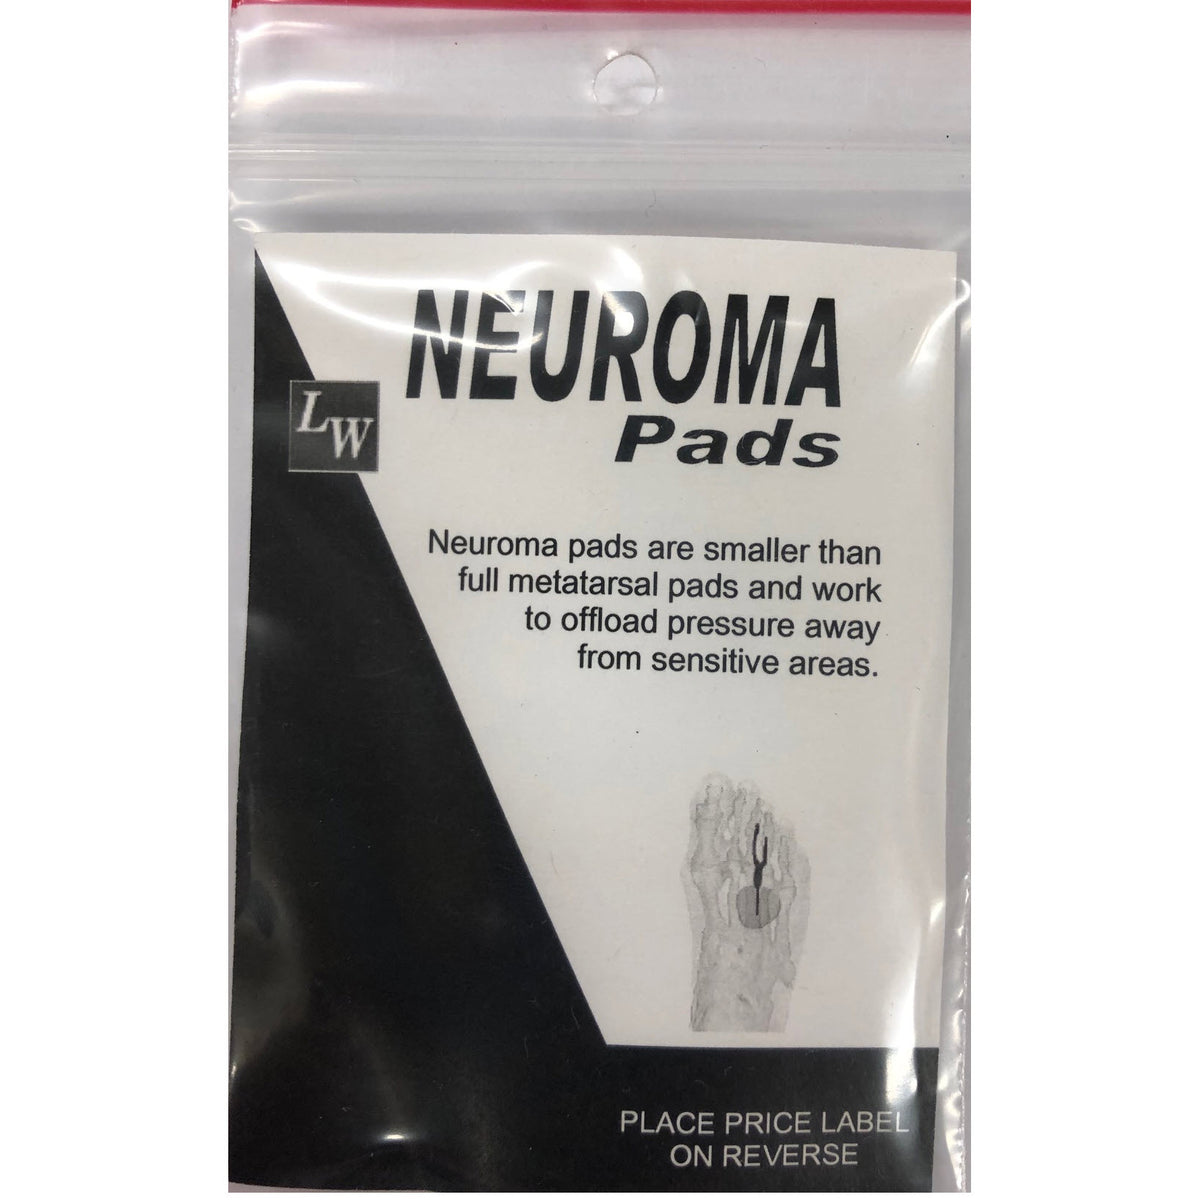 Packaging of Dr. Jill&#39;s LW FOOT CARE ADHESIVE NEUROMA PAD designed to alleviate pressure from sensitive areas of the foot, fabricated with latex-free materials.